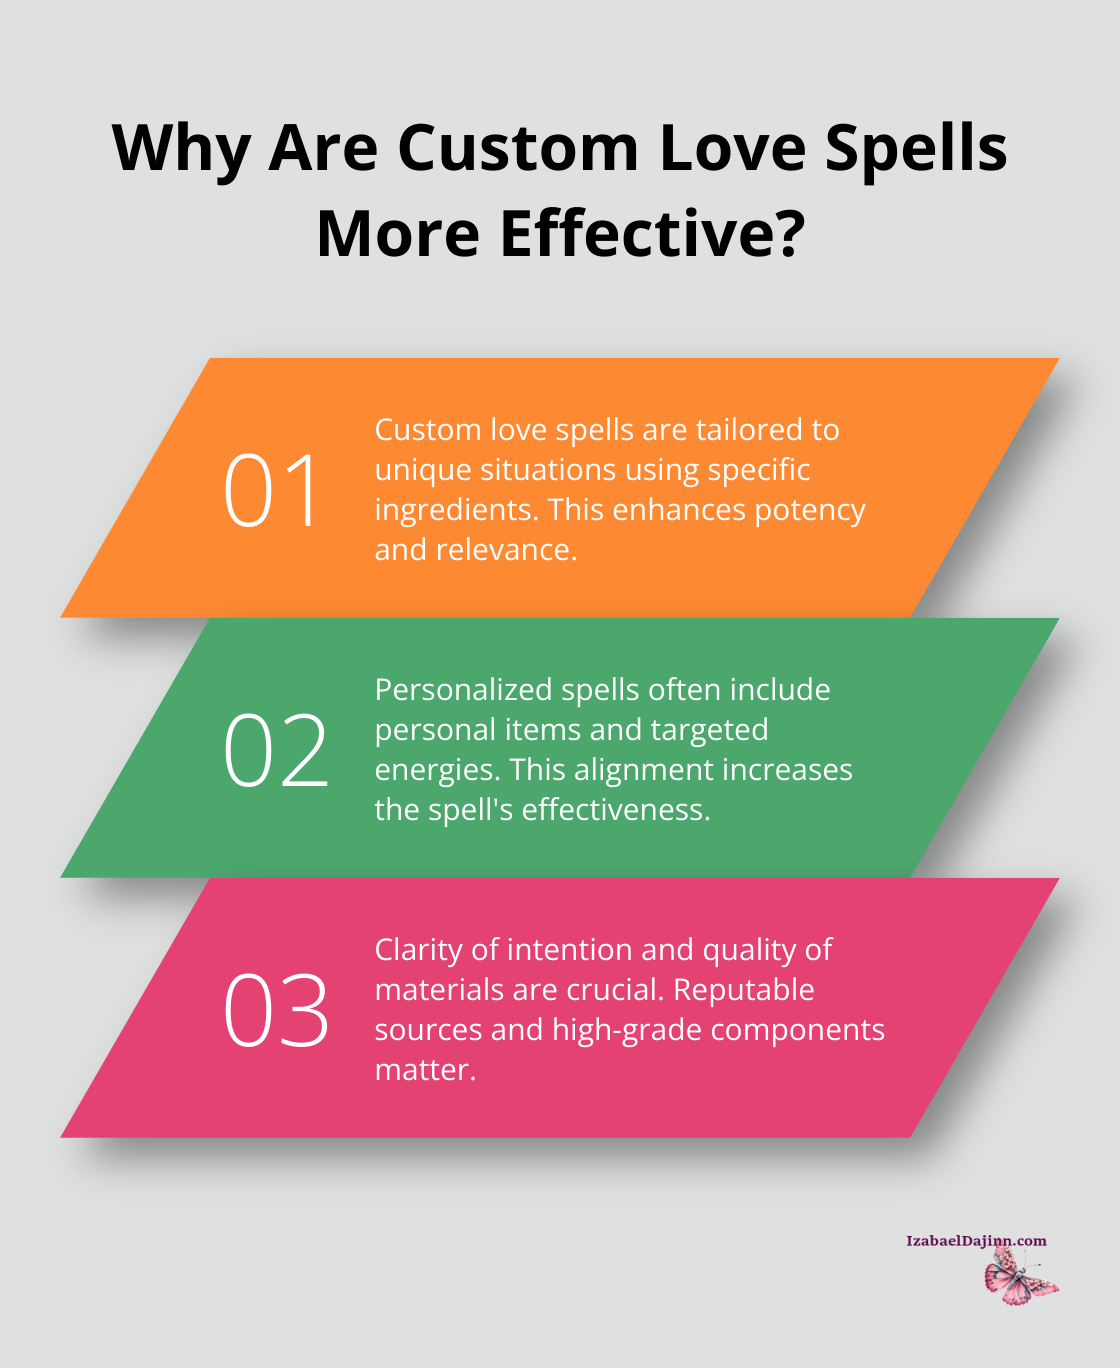 Fact - Why Are Custom Love Spells More Effective?